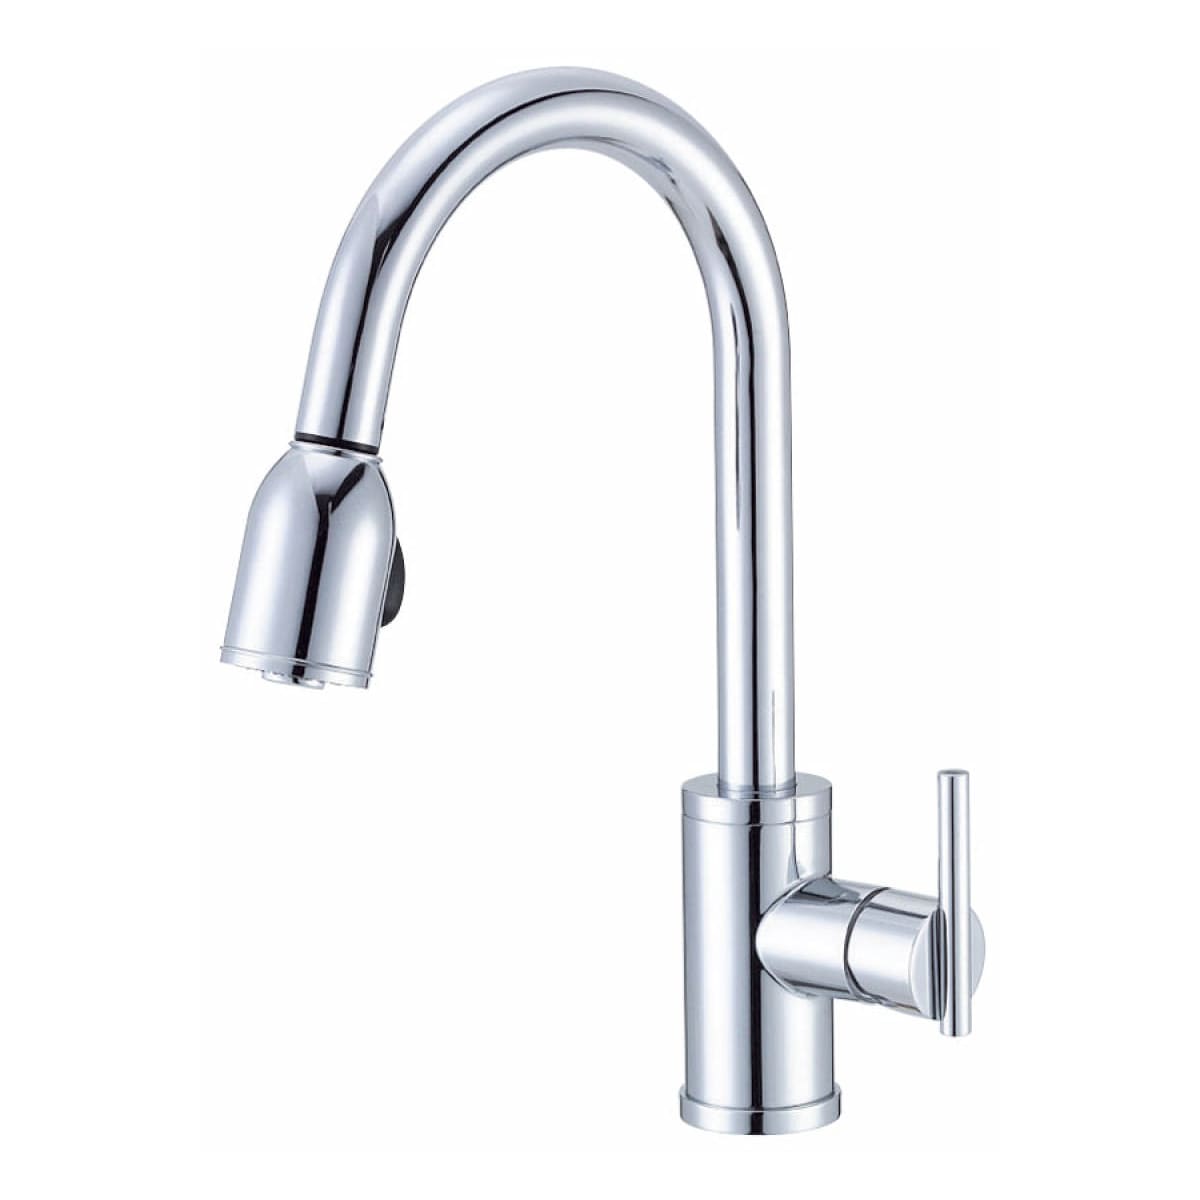 Danze D457058ss Stainless Steel Pull Down Spray Kitchen Faucet